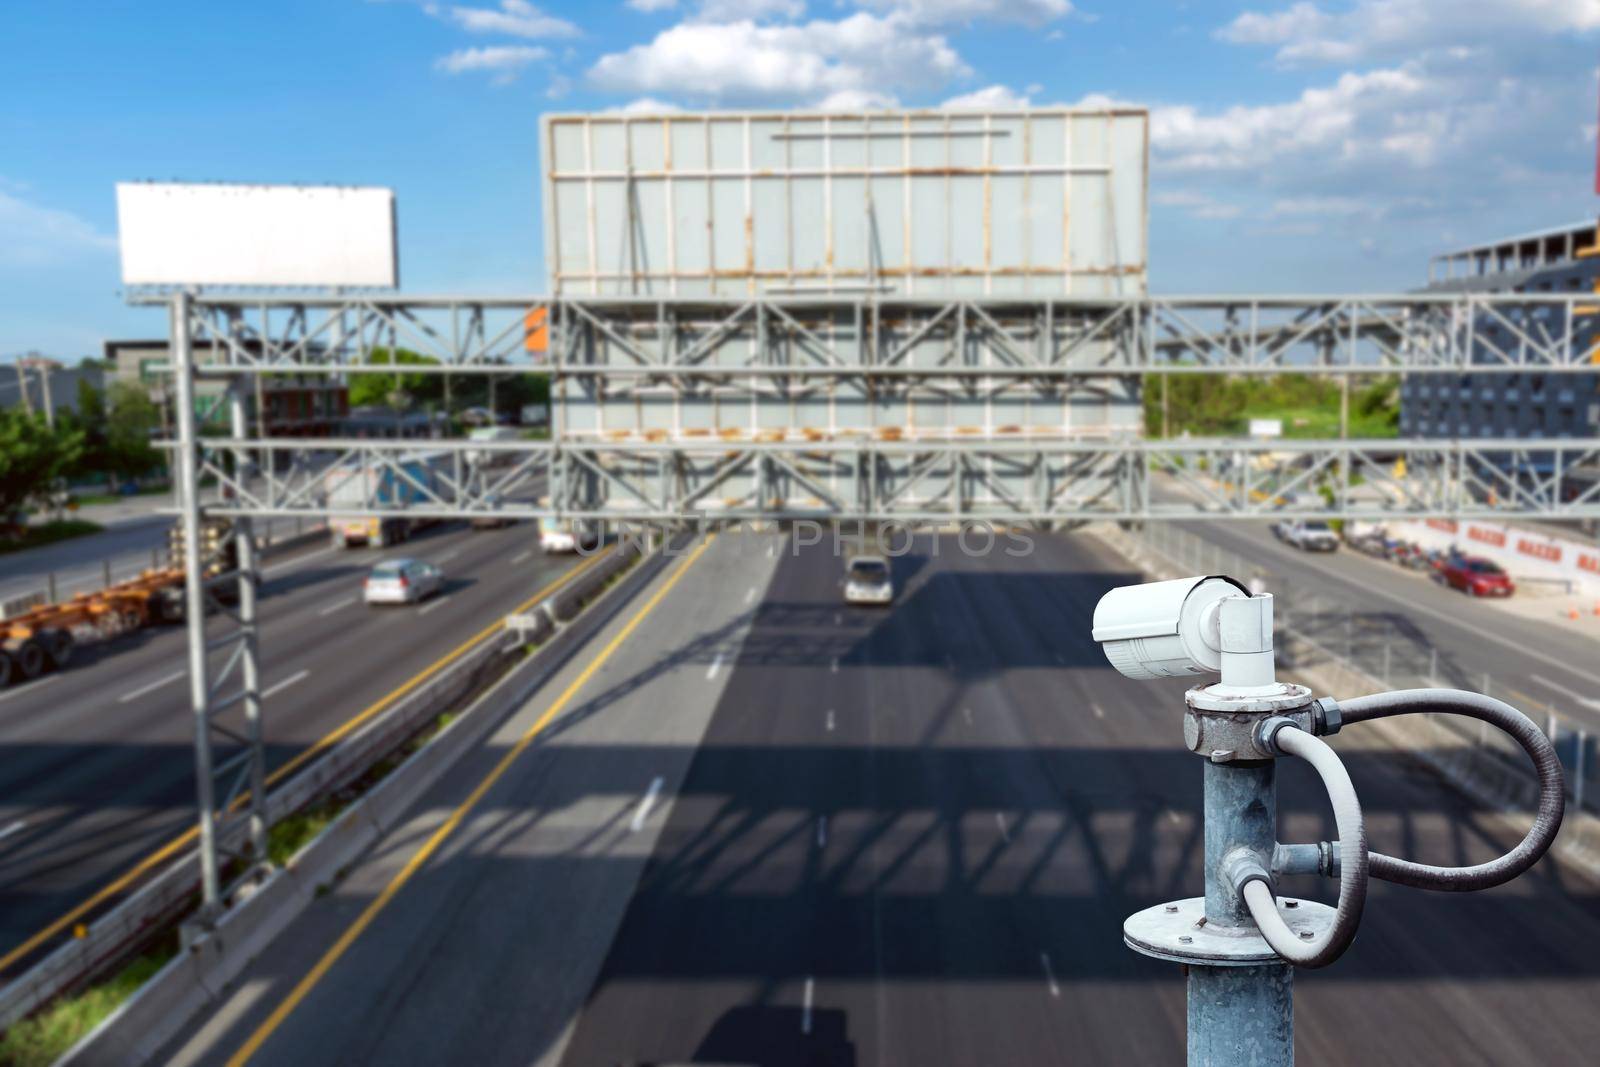 CCTV cameras on the overpass for recording road traffic. by wattanaphob